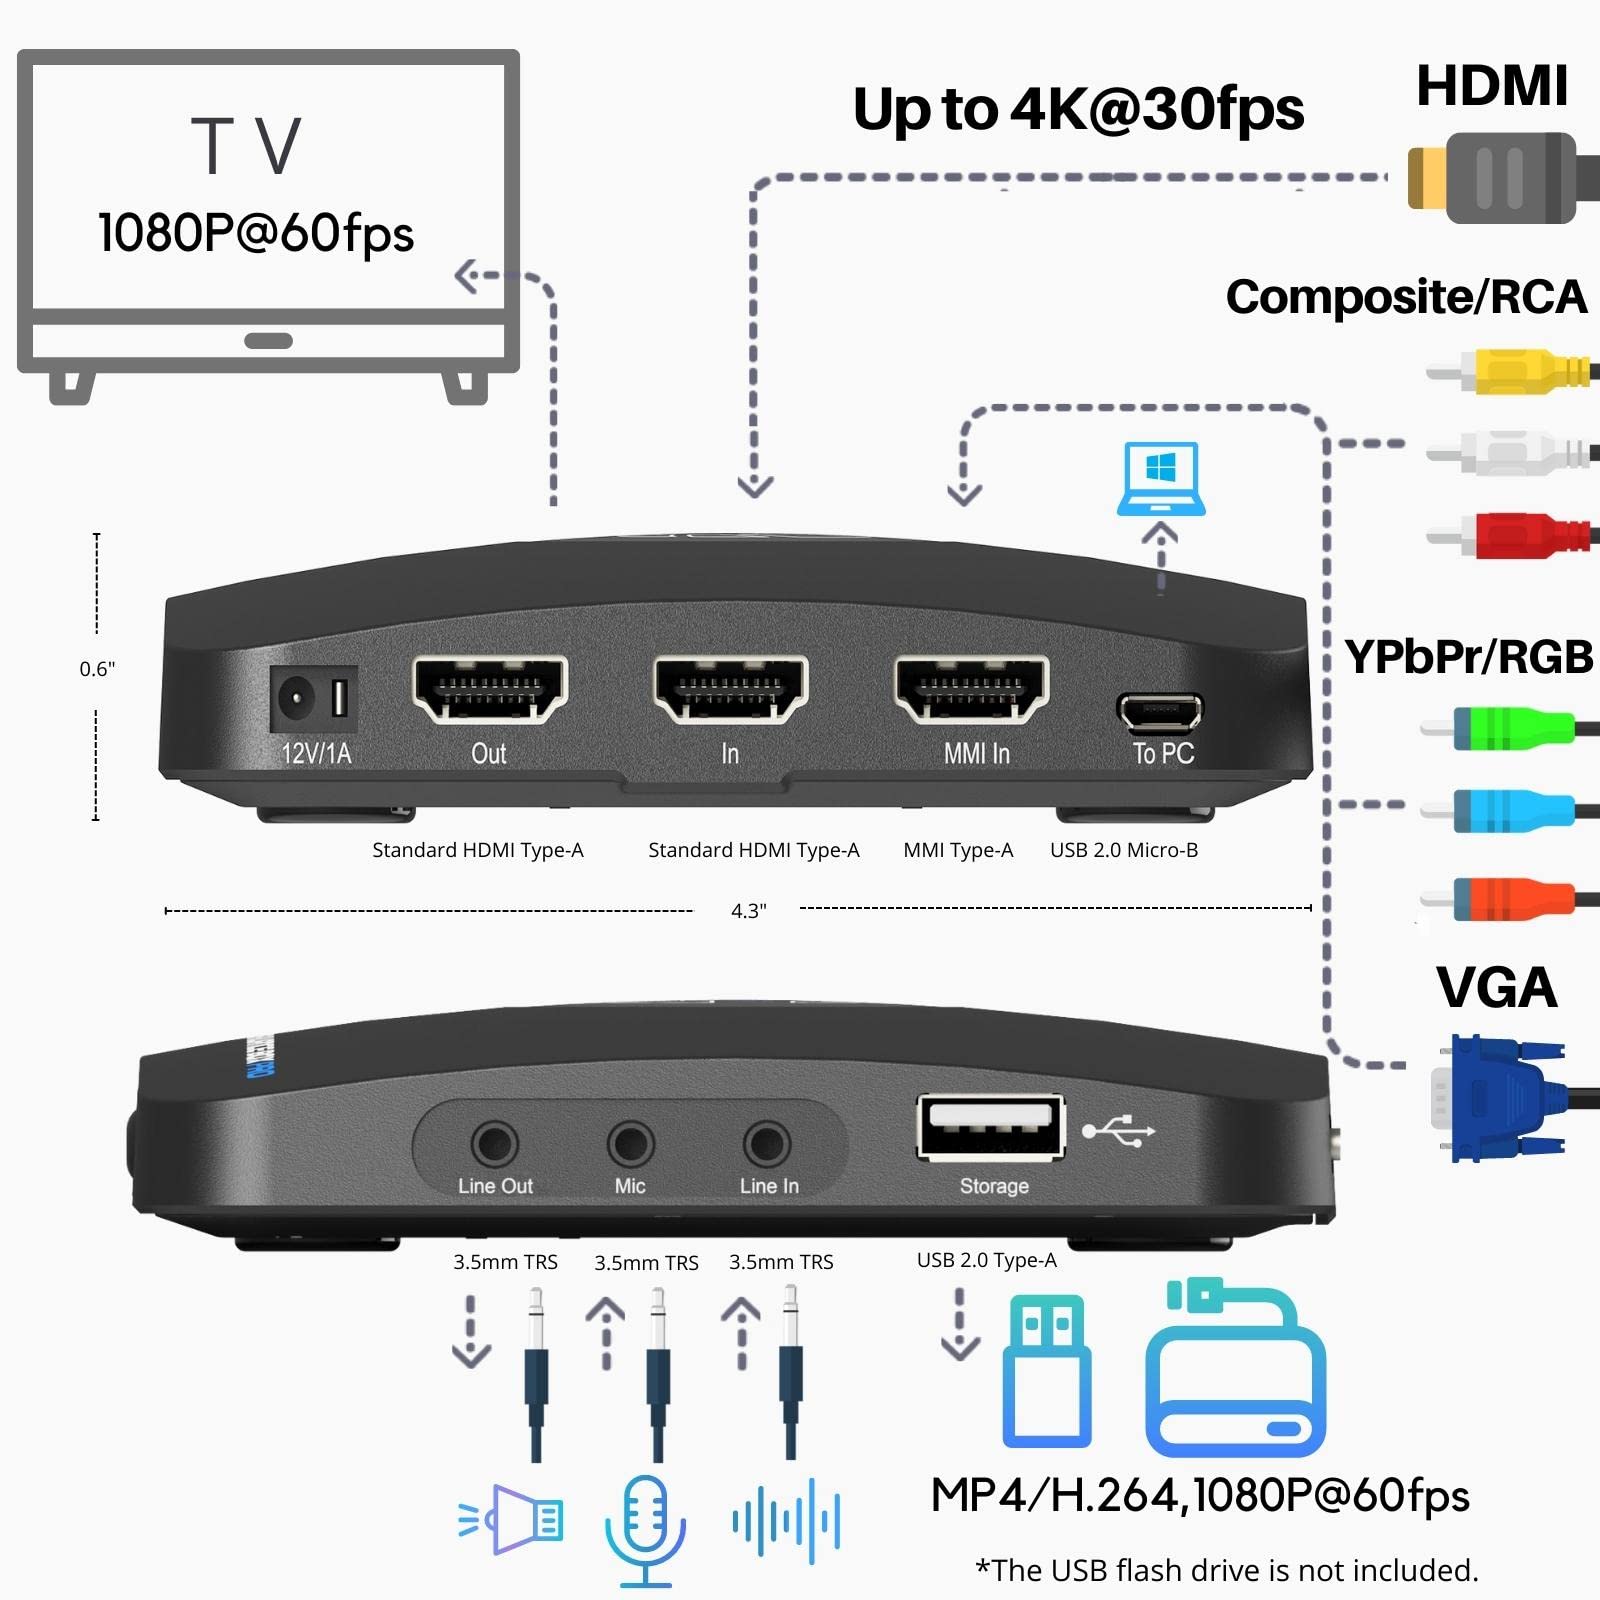 ClonerAlliance Box Pro, 1080p@60fps Video Recorder, DVR with HDMI Capture, Playback on TV. RCA/YPbPr/VGA to Digital Converter. Schedule Recording. No PC Required.